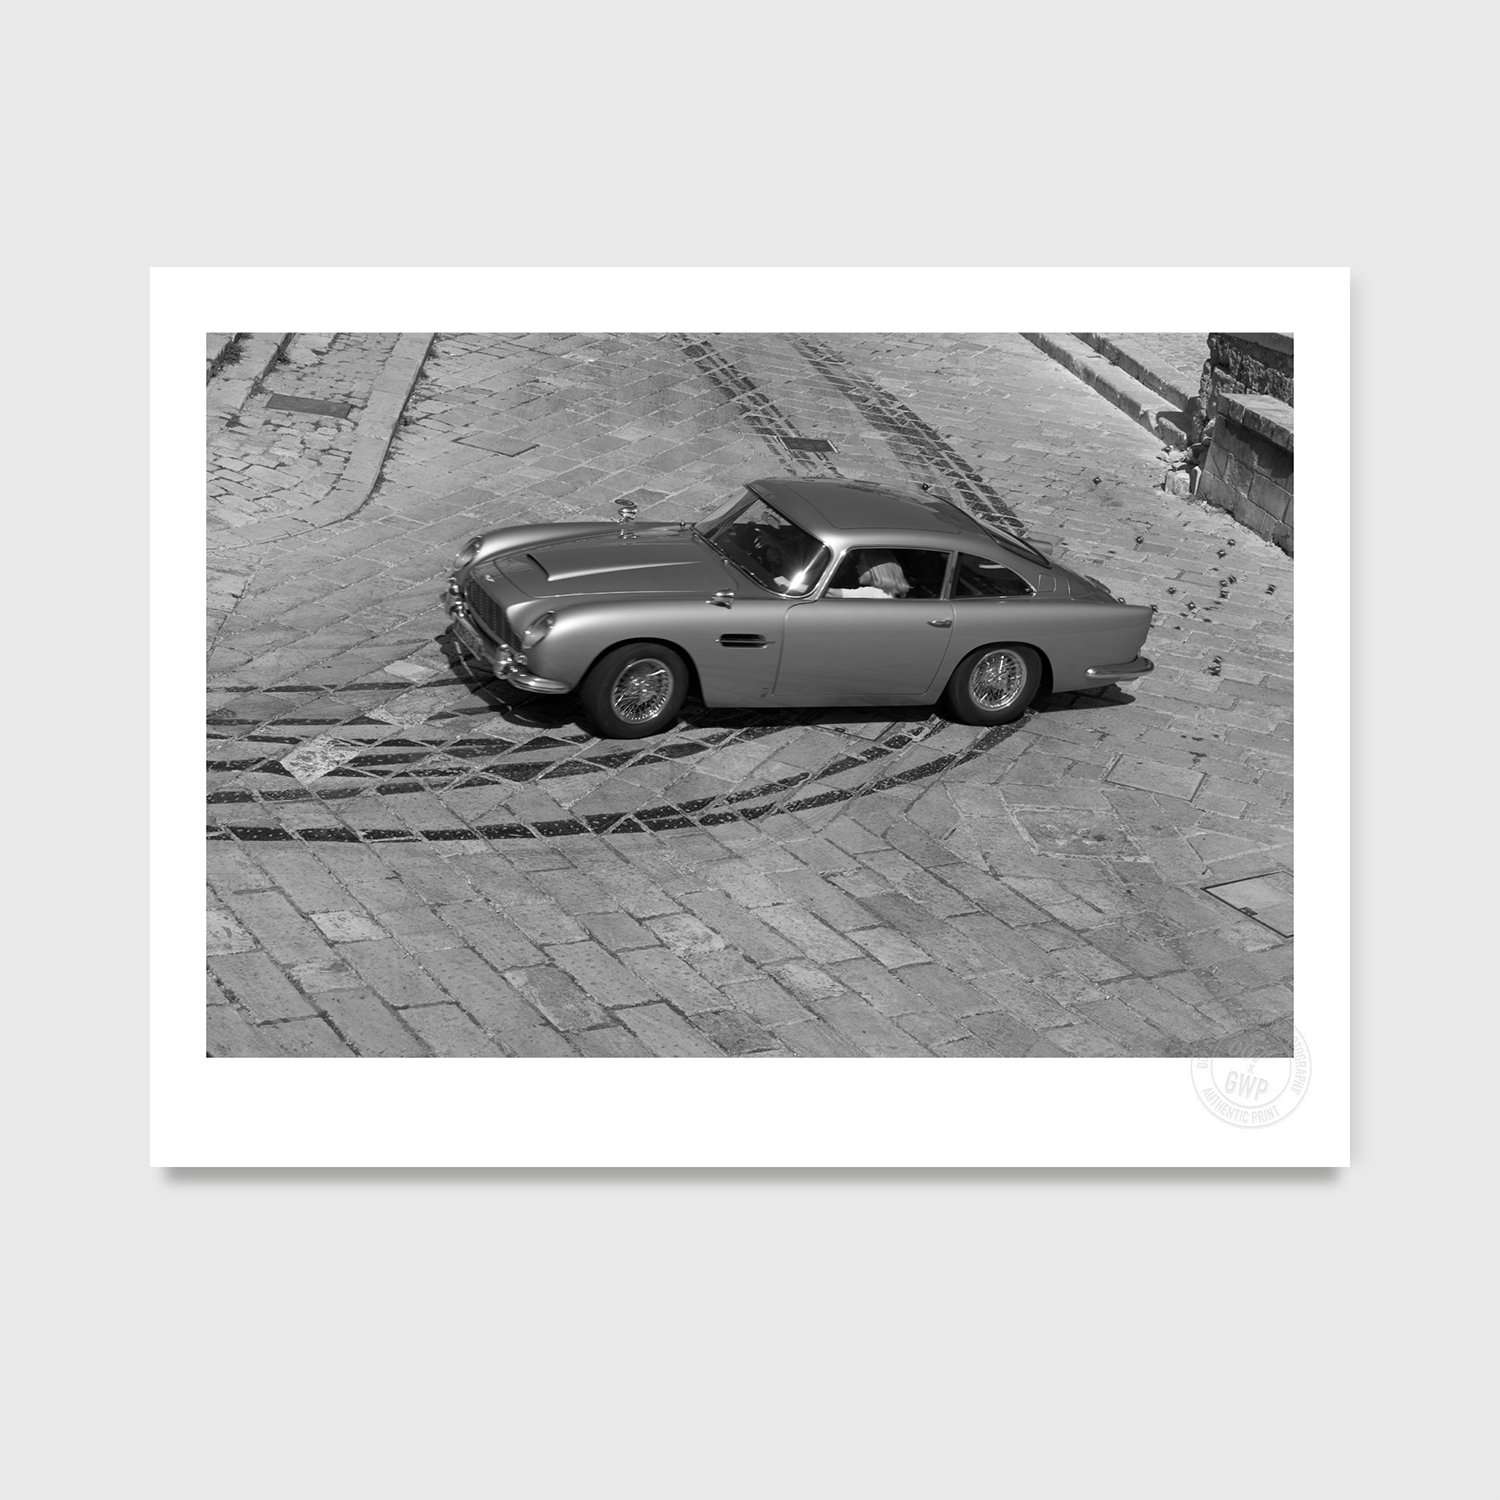 007 DB5 Tire Tracks In Matera (2019) Studio Stamped Print - By Greg Williams Photography PHOTO PRINT Greg Williams 